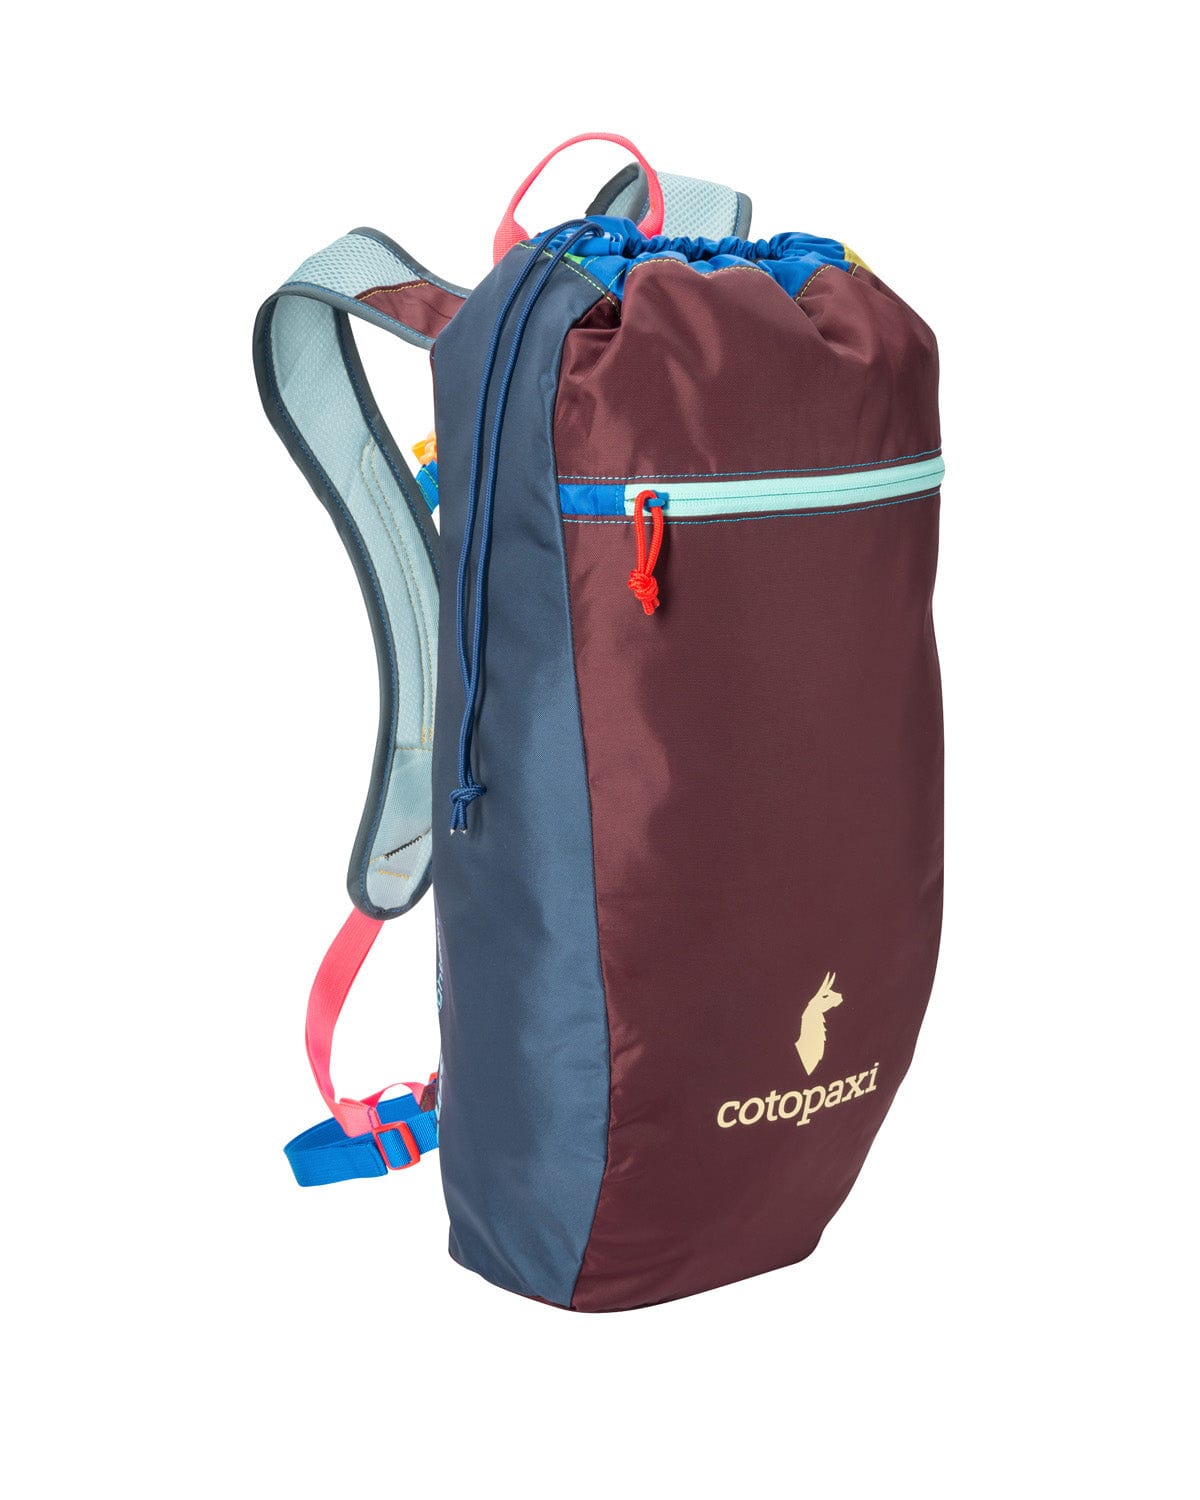 Custom Cotopaxi Luzon Backpack